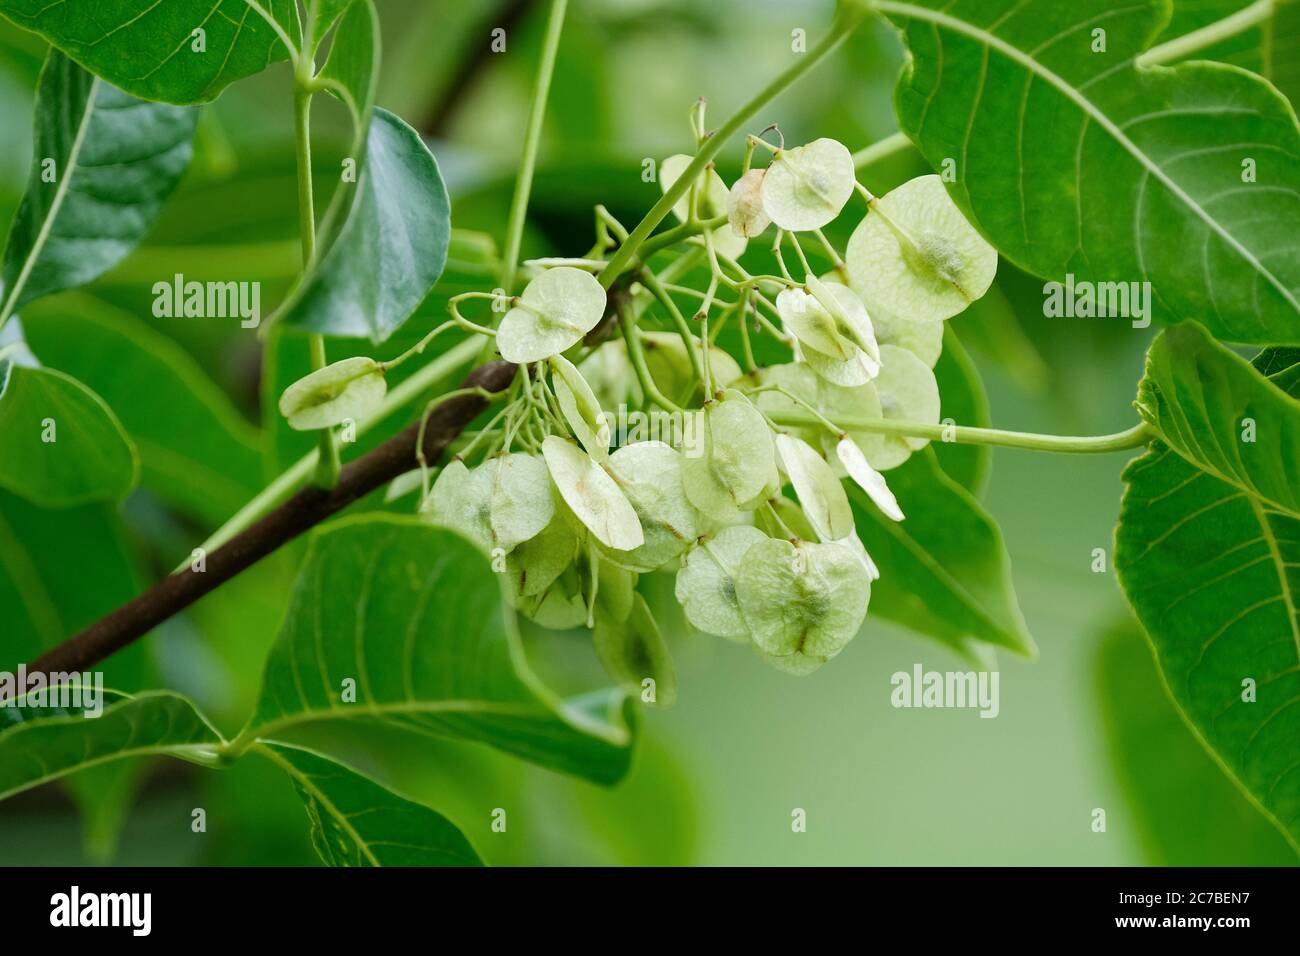 Hop-like fruits,  samara of the Ptelea trifoliata, common hoptree, wafer ash, stinking ash, skunk bus growing on a tree in late summer Stock Photo